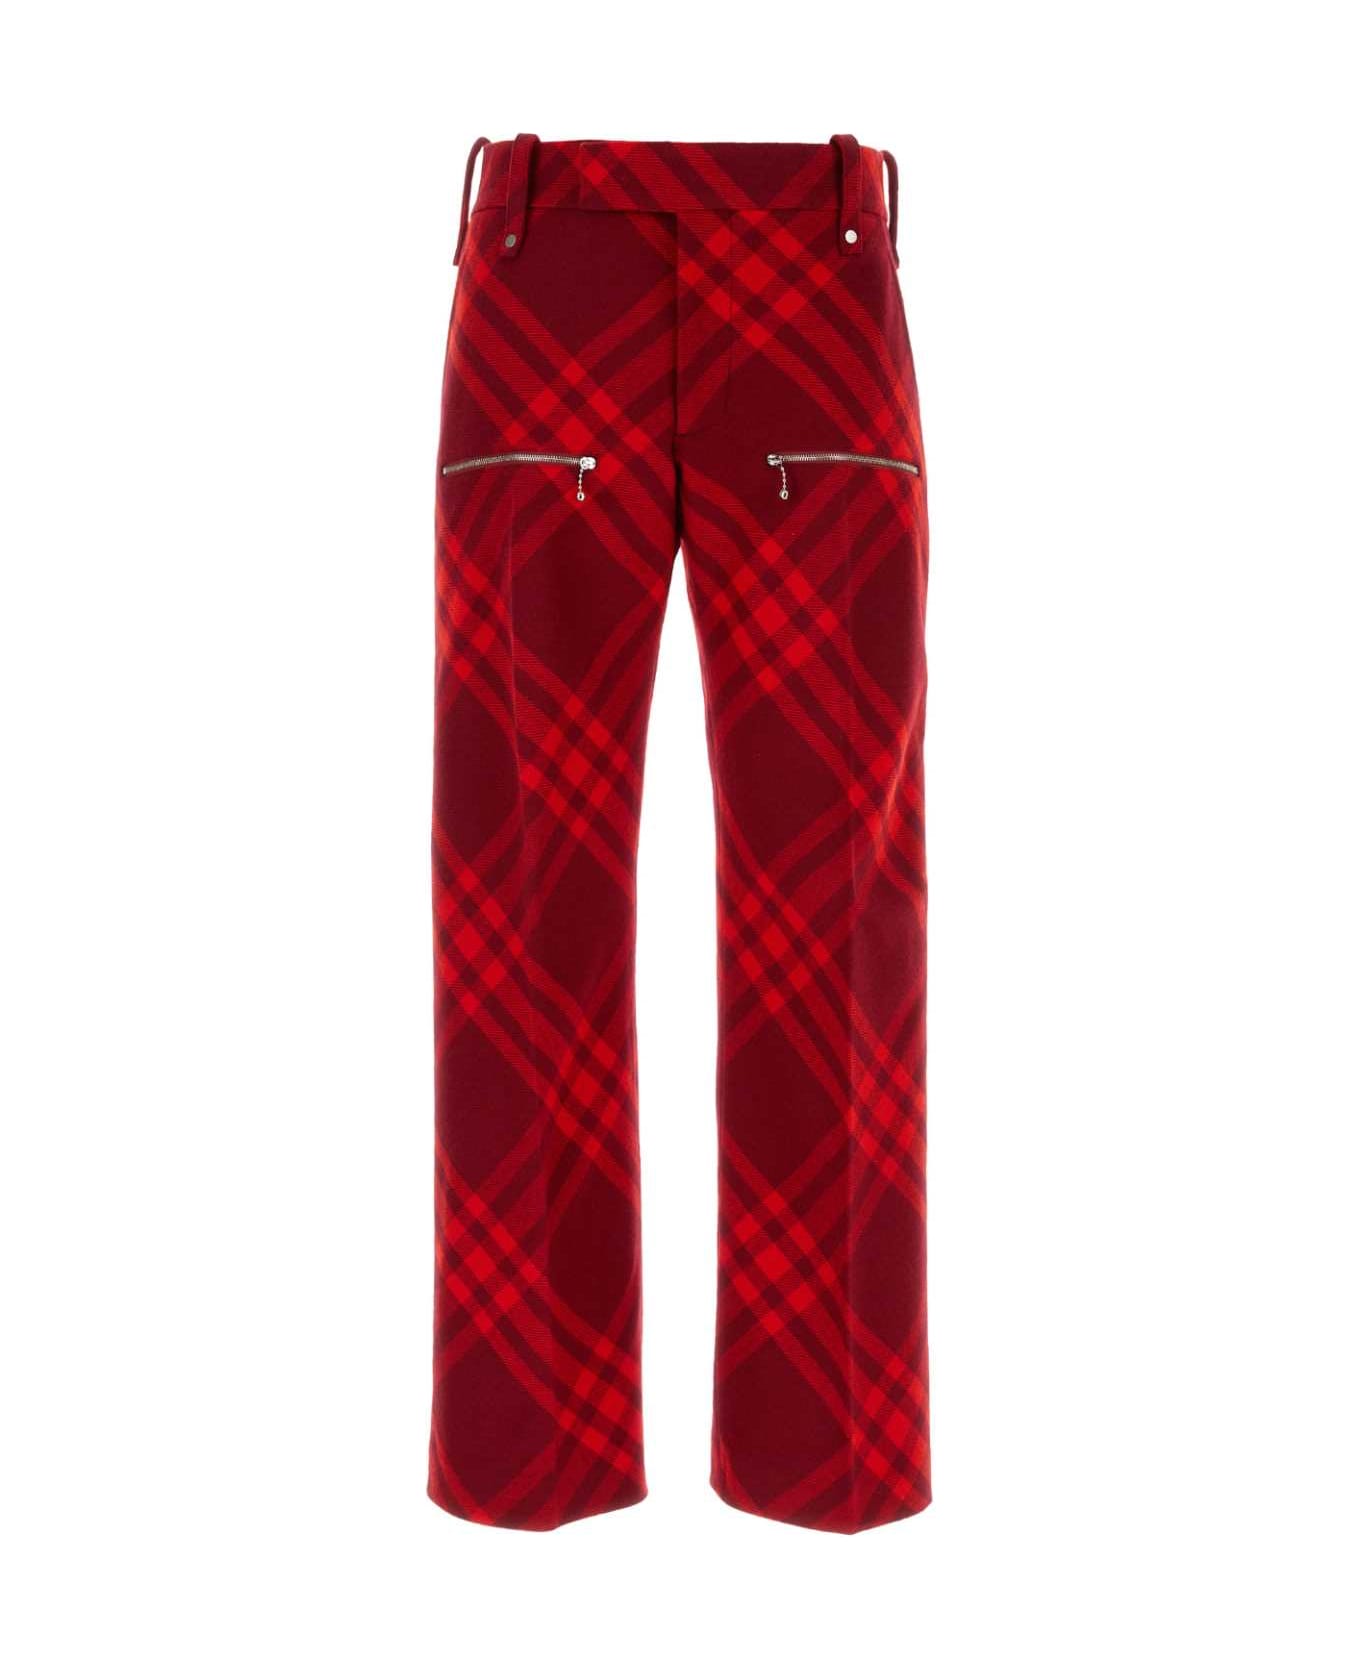 Burberry Embroidered Wool Pant - RIPPLE